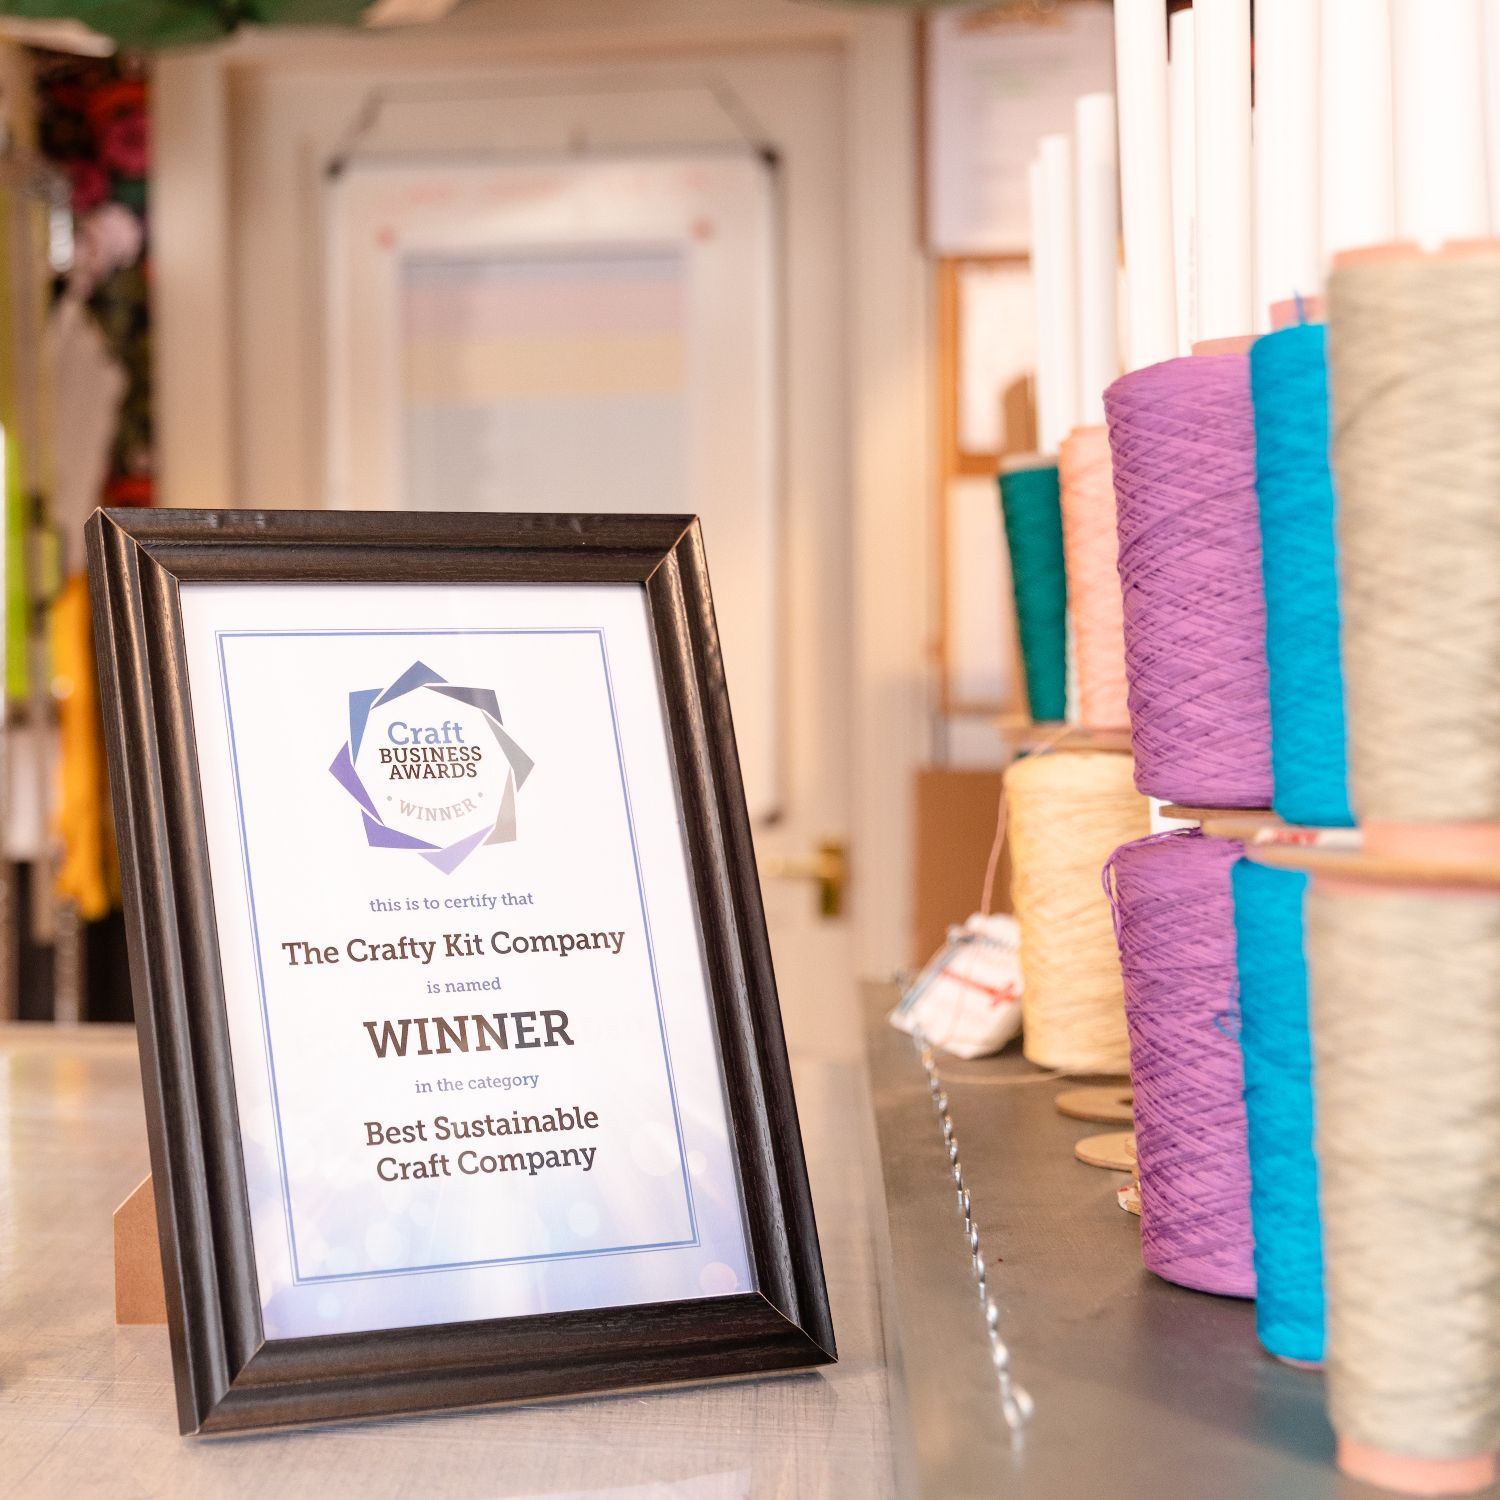 The Crafty Kit Company voted Best Sustainable Craft Company in the Craft Business Awards